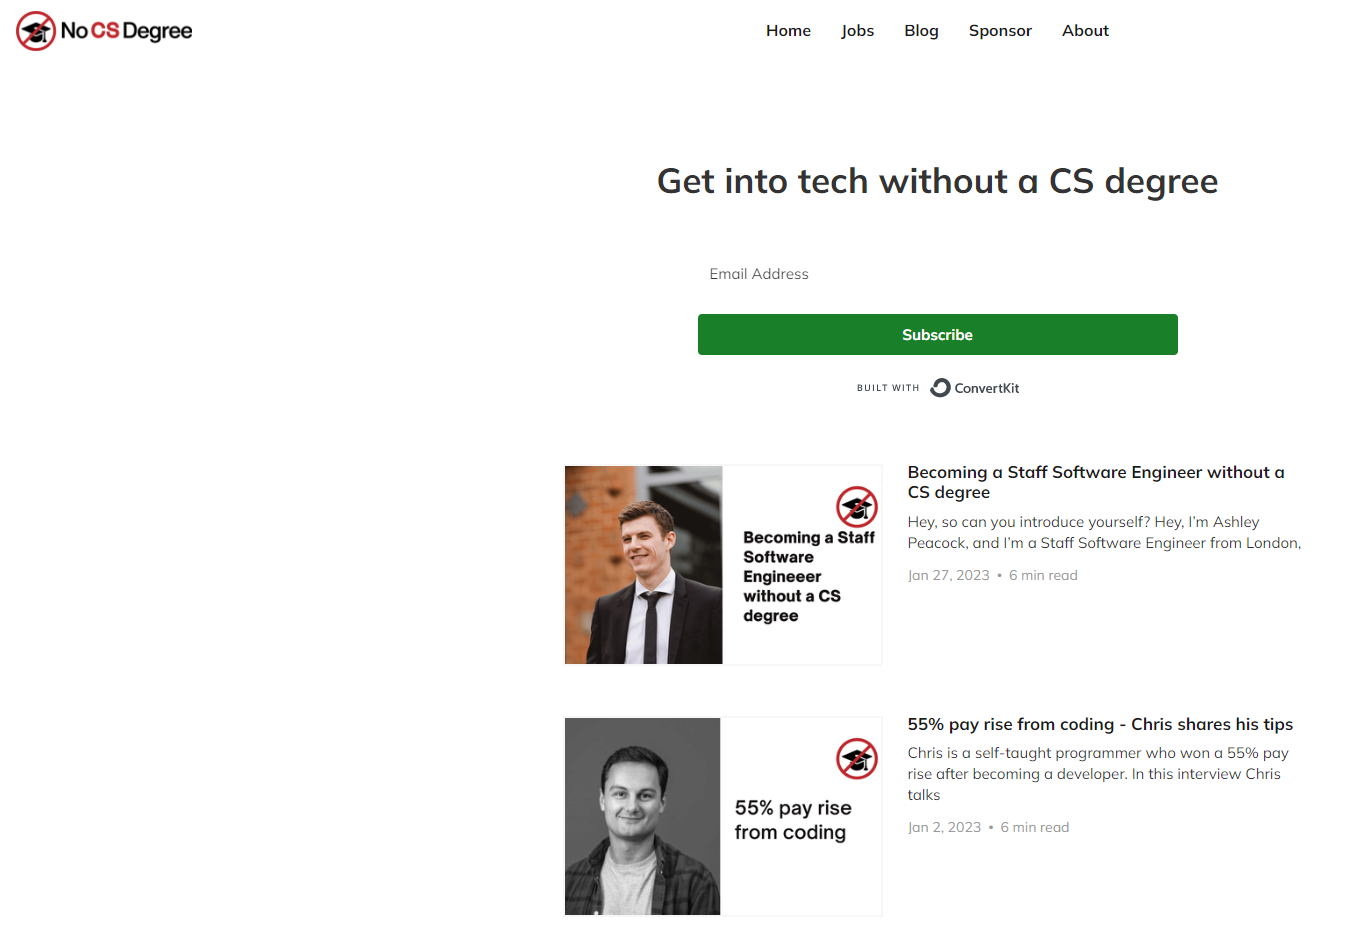 The landing page of the No CS Degree blog from @PeteCodes